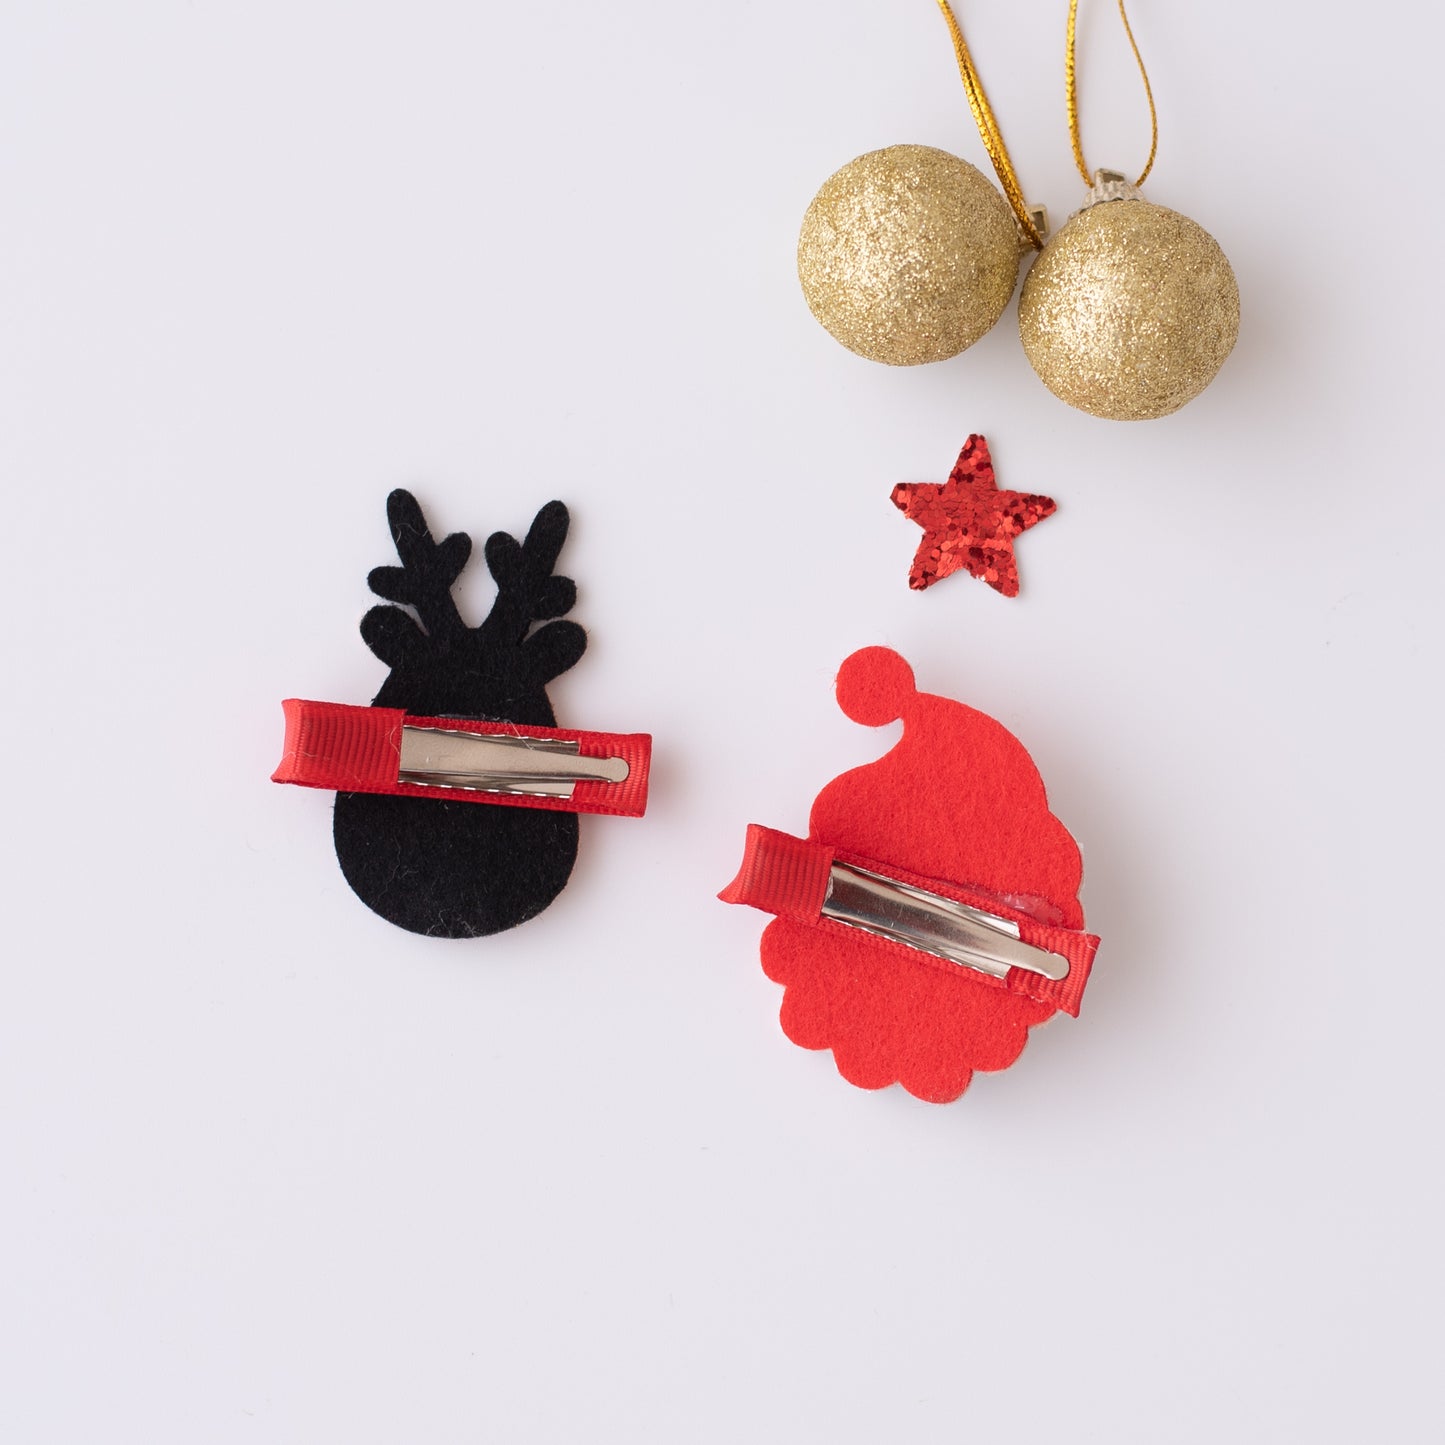 Set of  2 cute alligator clips - 1 glitter santa claus and 1 reindeer with red nose. - White, Red, Brown